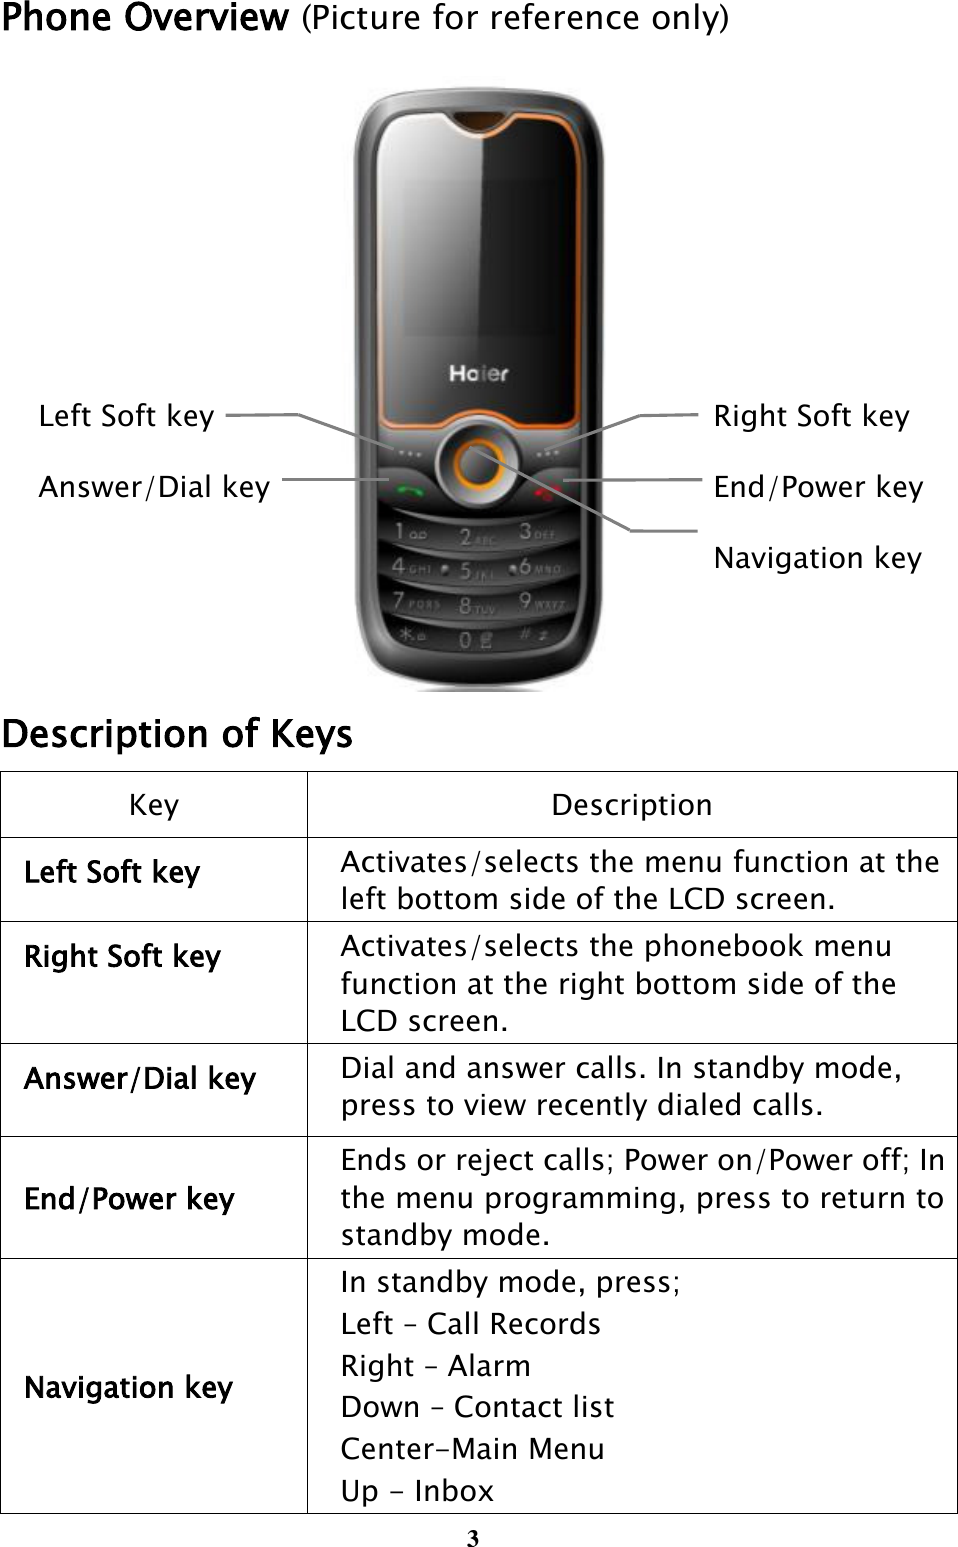  3 Phone Overview (Picture for reference only)  Description of Keys Key Description Left Soft key Activates/selects the menu function at the left bottom side of the LCD screen. Right Soft key Activates/selects the phonebook menu function at the right bottom side of the LCD screen. Answer/Dial key Dial and answer calls. In standby mode, press to view recently dialed calls. End/Power key Ends or reject calls; Power on/Power off; In the menu programming, press to return to standby mode. Navigation key In standby mode, press; Left – Call Records Right – Alarm Down – Contact list Center-Main Menu Up - Inbox Left Soft key Answer/Dial key Right Soft key End/Power key Navigation key 